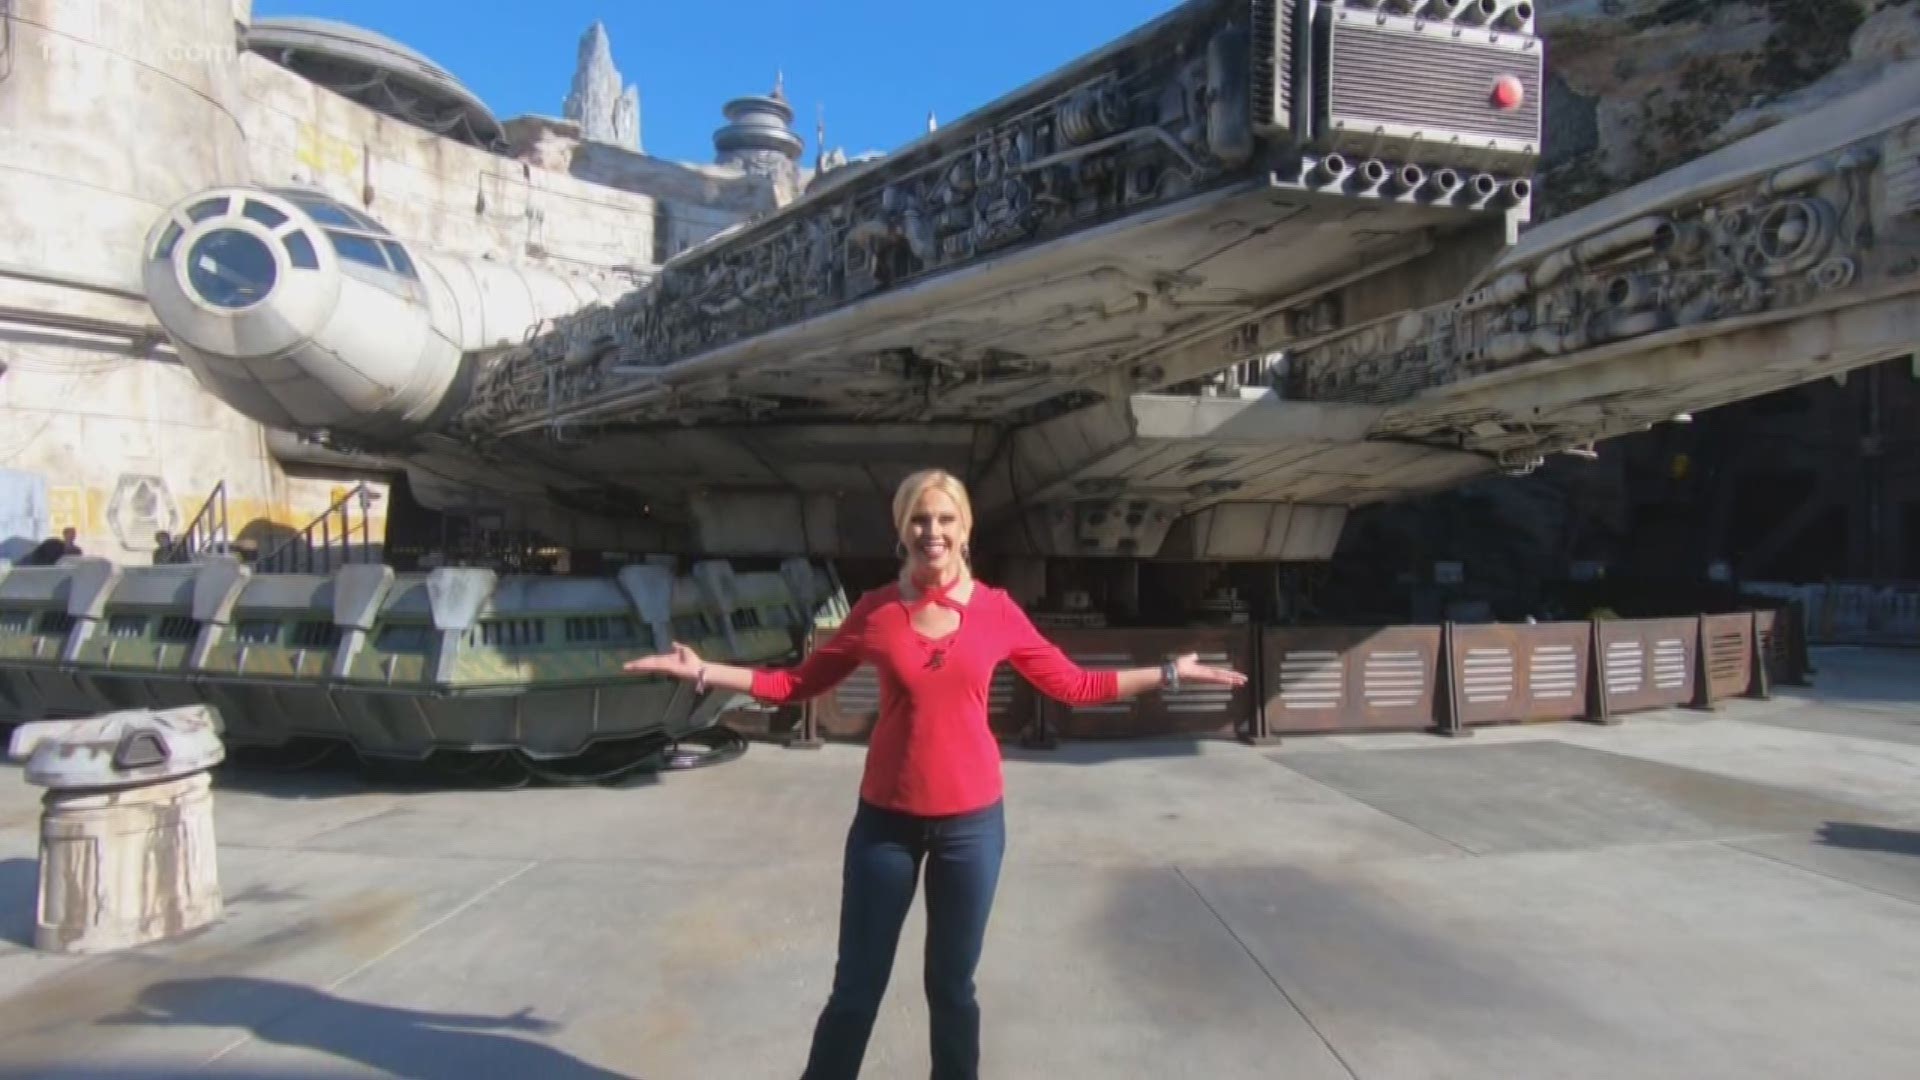 Take a trip to Planet Batuu at Star Wars: Galaxy’s Edge and discover the food and fun that awaits you! Star Wars fans will feel like they’ve jumped into their favorite movie with the archived sights and sounds they remember from the big screen.